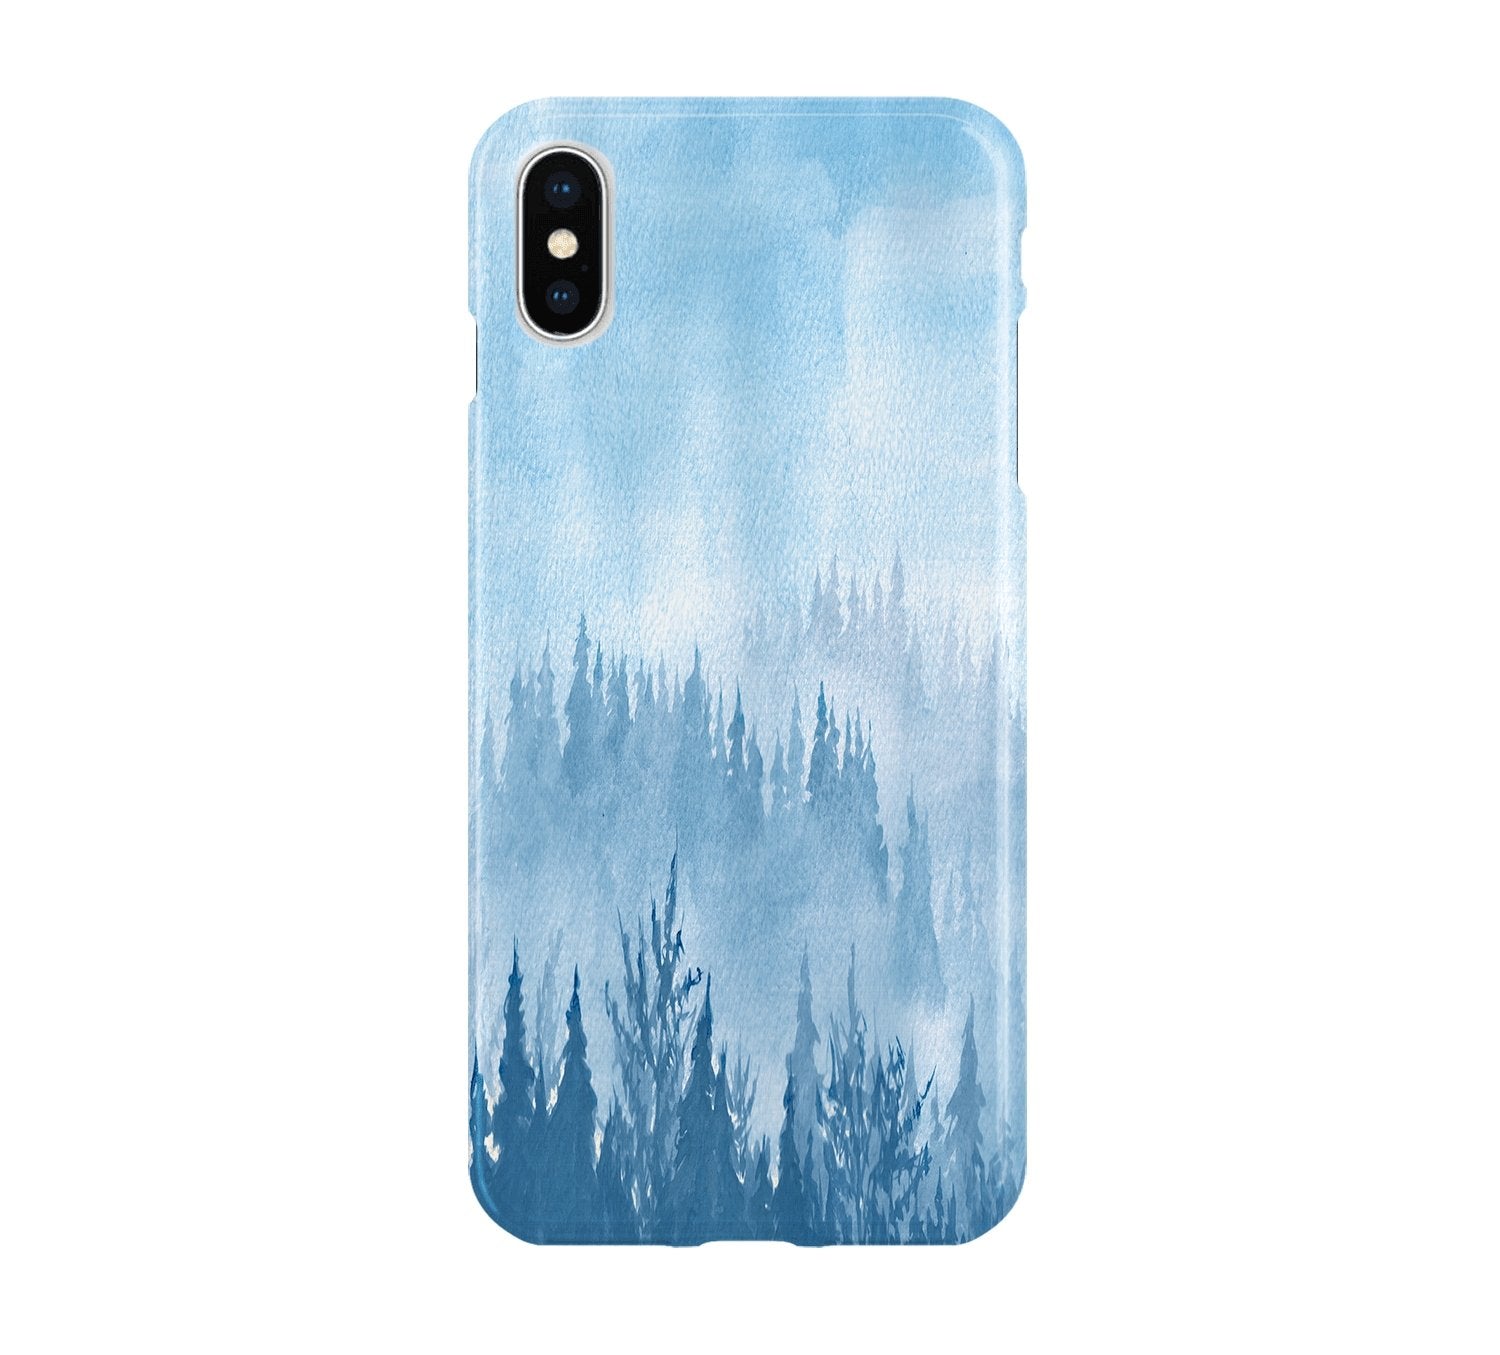 Foggy Blue - iPhone phone case designs by CaseSwagger